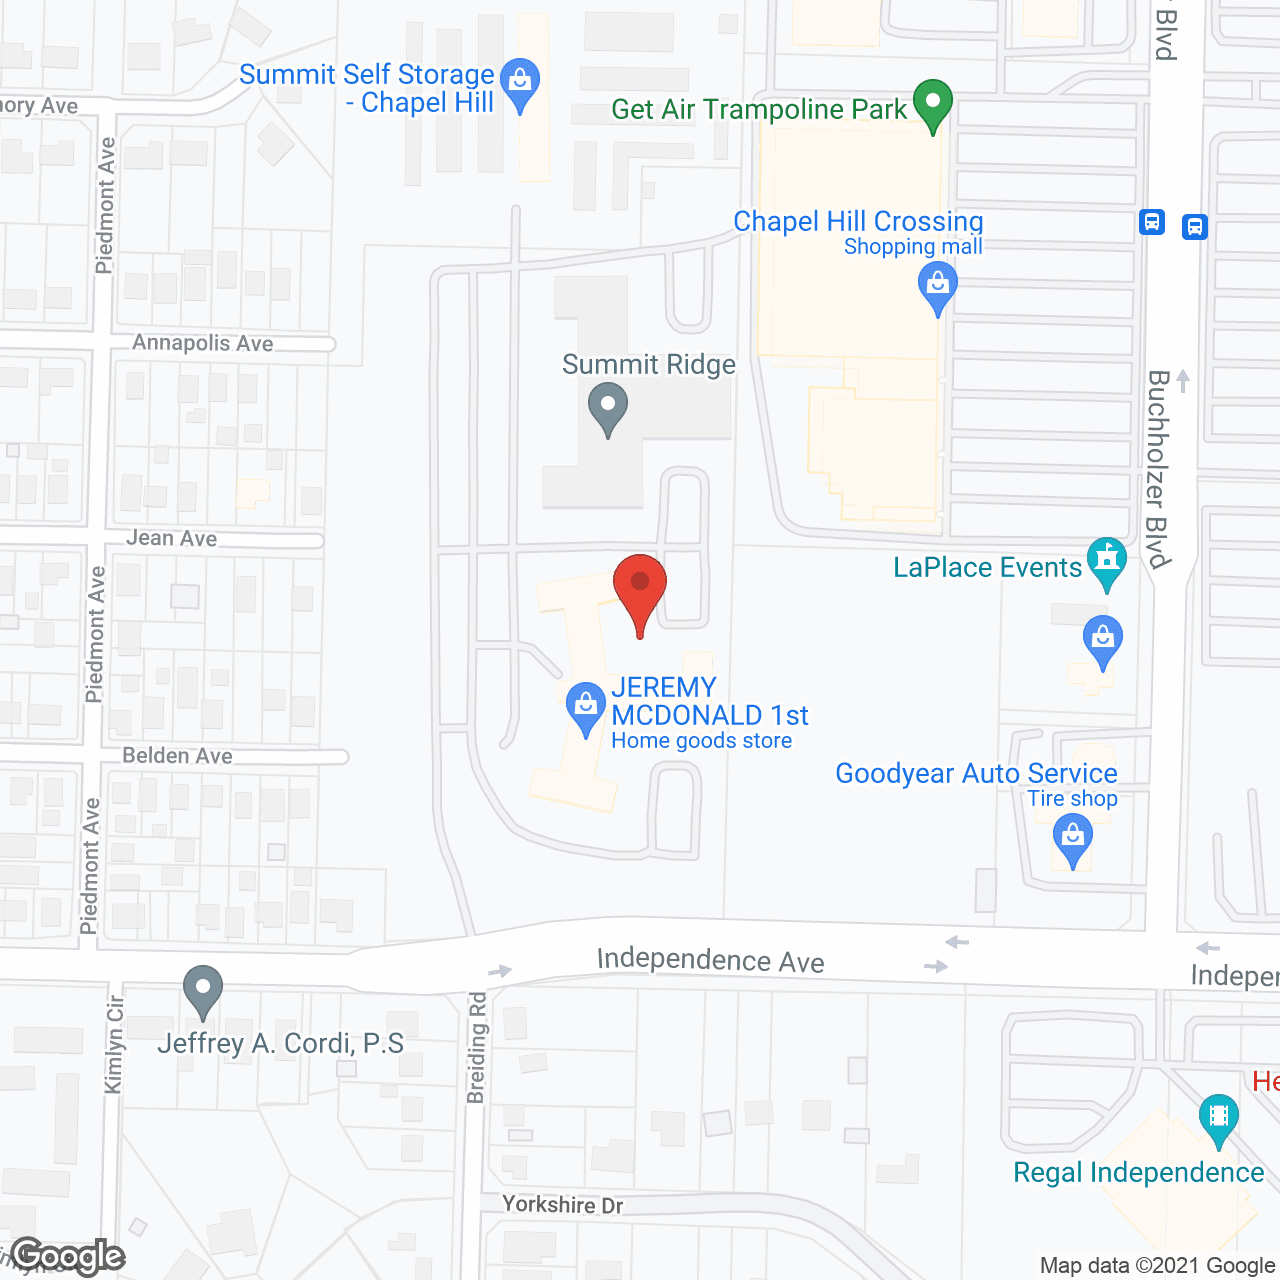 Chapel Hill Towers in google map